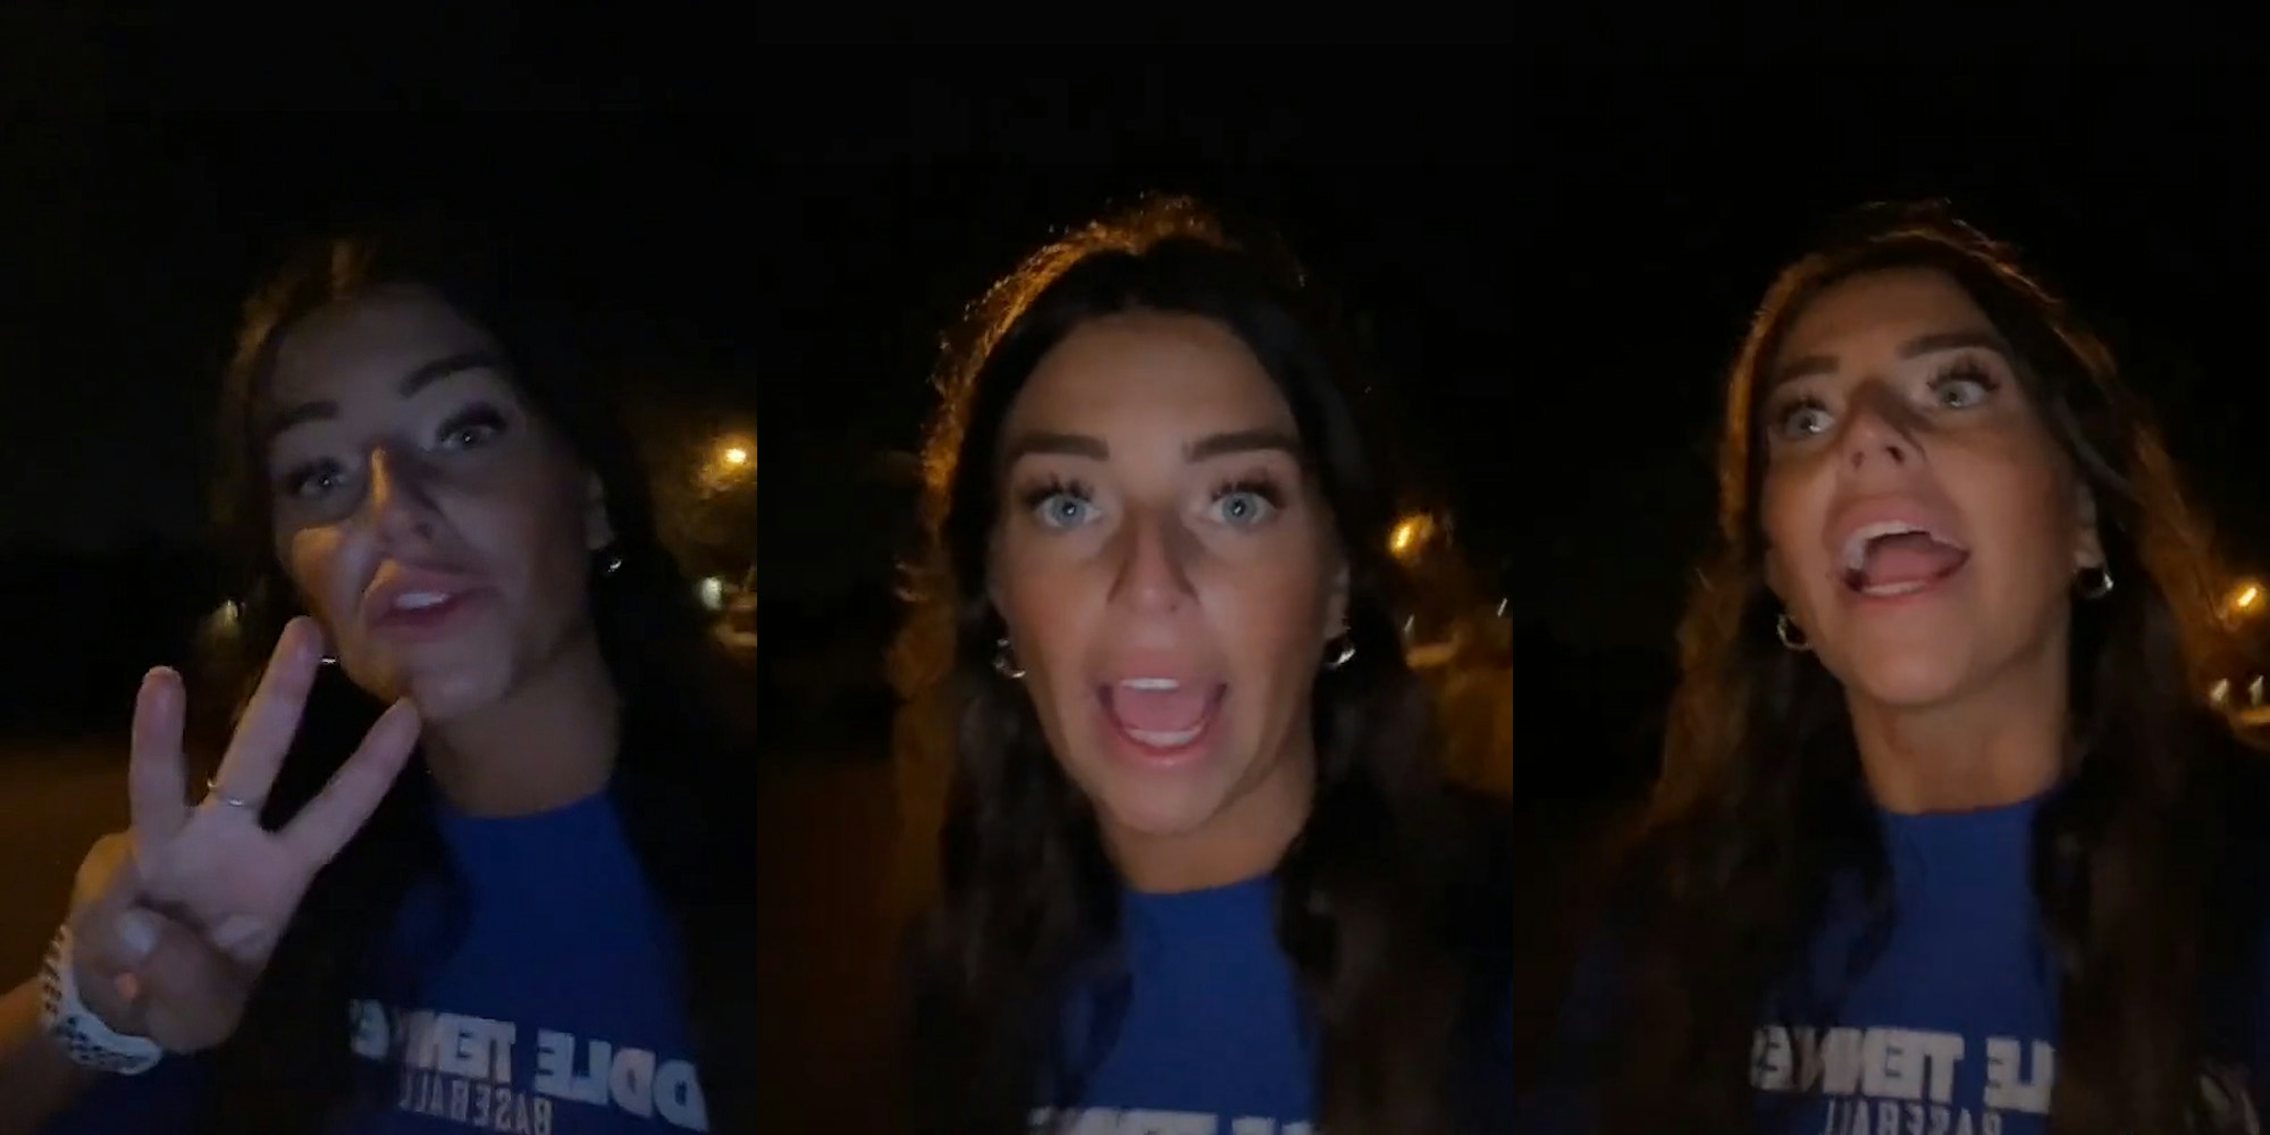 woman walking outside at night holding 3 fingers up speaking (l) woman walking at night outside speaking (c) woman walking outside at night speaking (r)